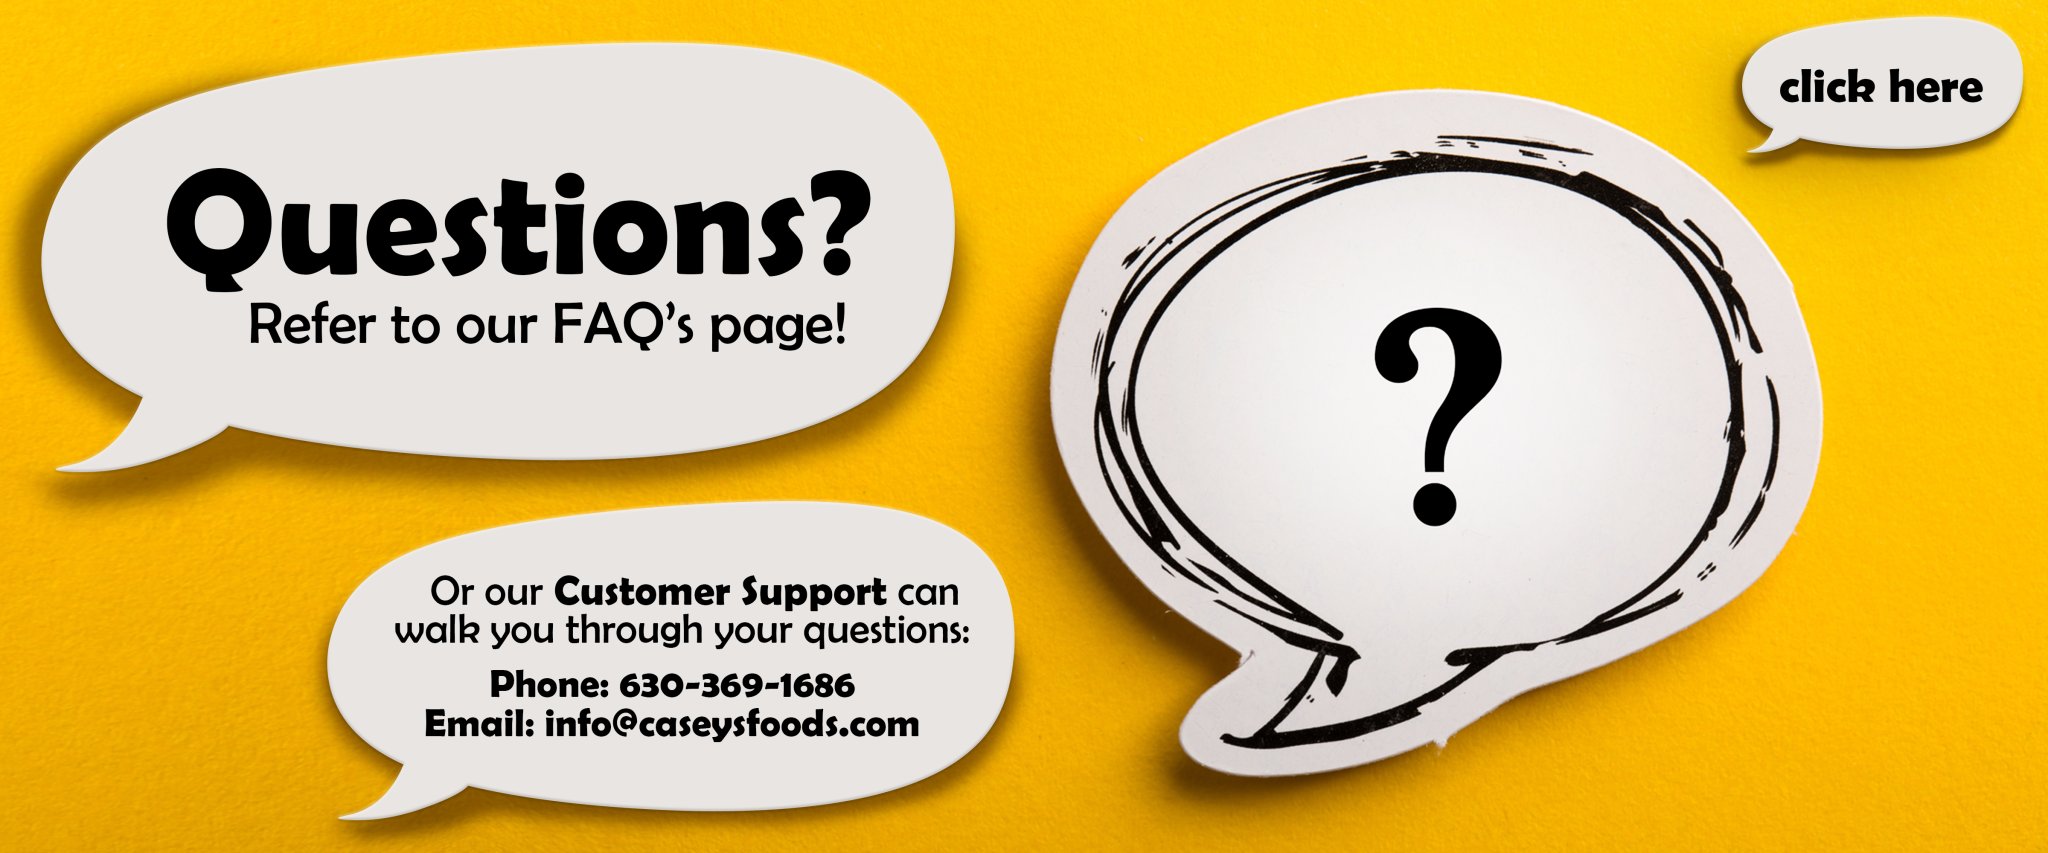 Questions? Refer to our FAQ's Page! Click here.